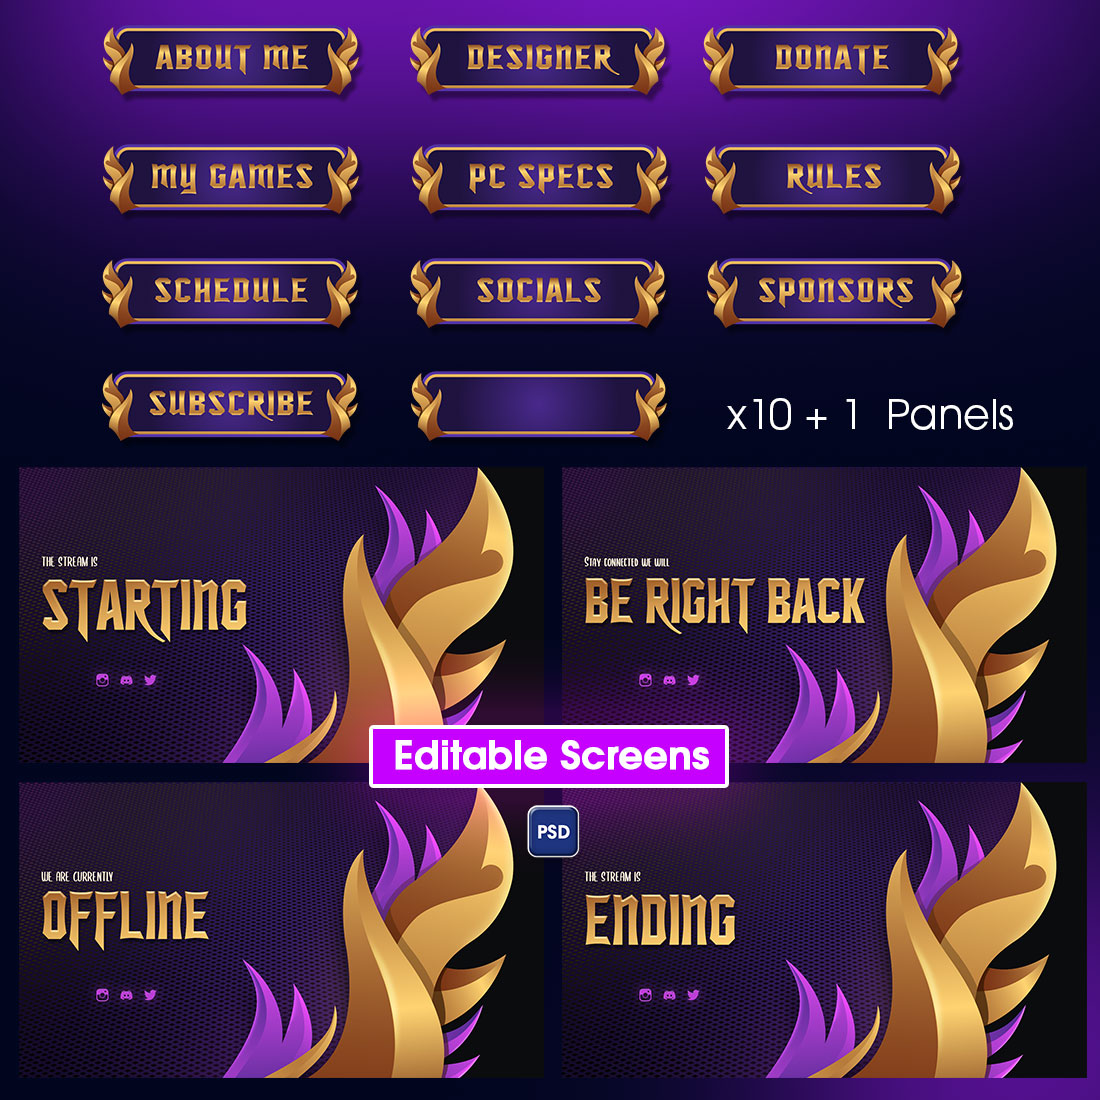 Royal fantasy Stream Overlay pack for Twitch and Youtube in purple preview image.